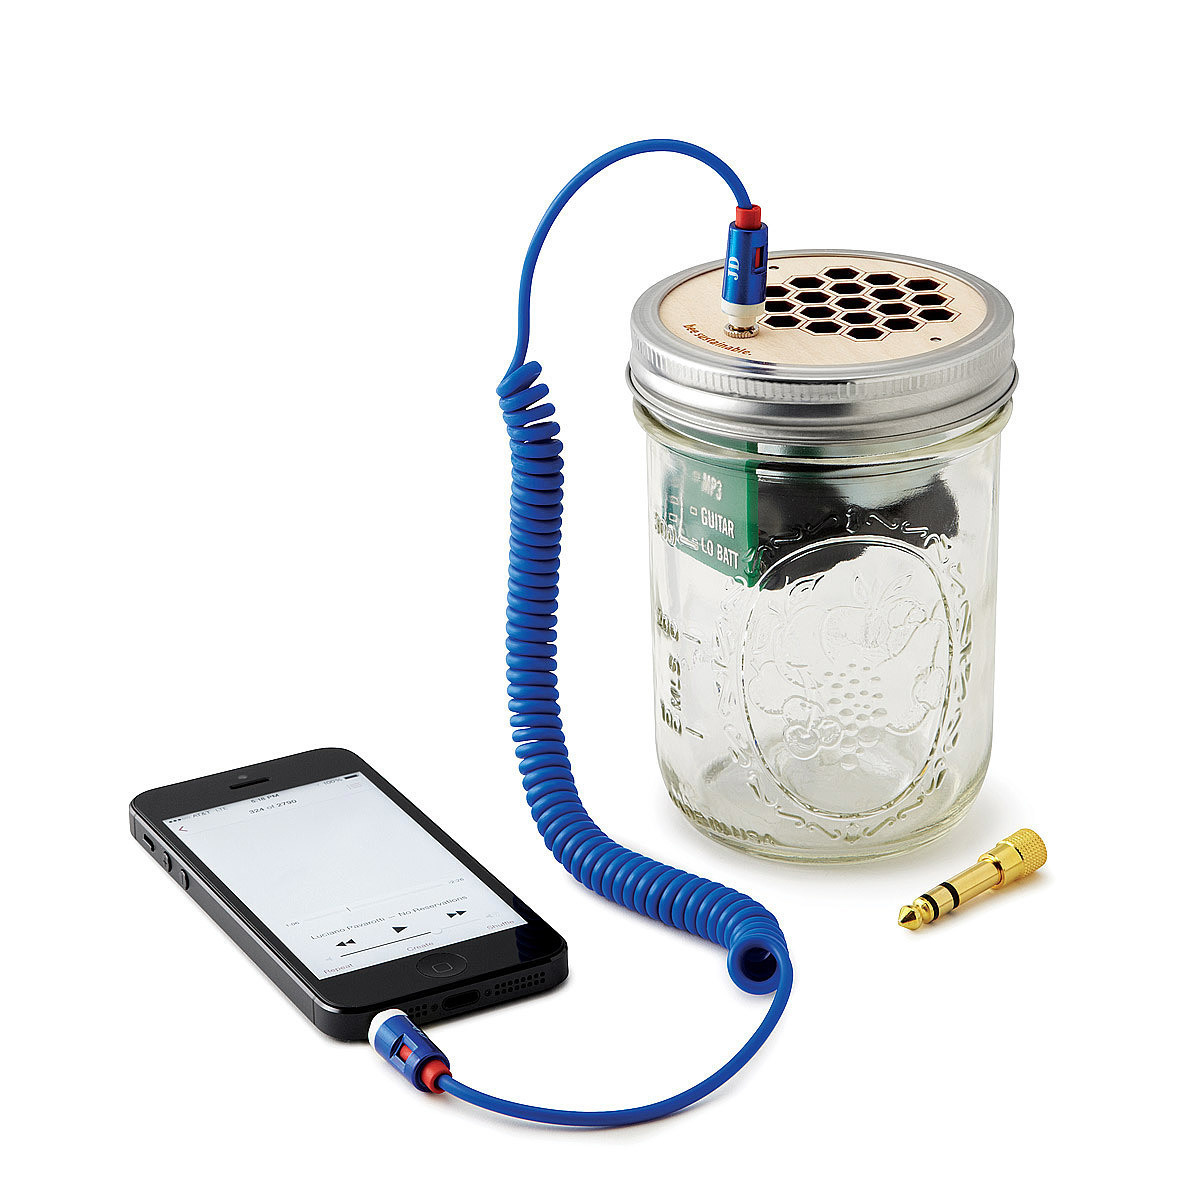 Graduates from Cal Poly State who are passionate about engineering, design, art, and music created this Mason Jar Speaker & Amplifier, and the reviews are top-notch. Looks like sound quality and style won't be an issue with this product.